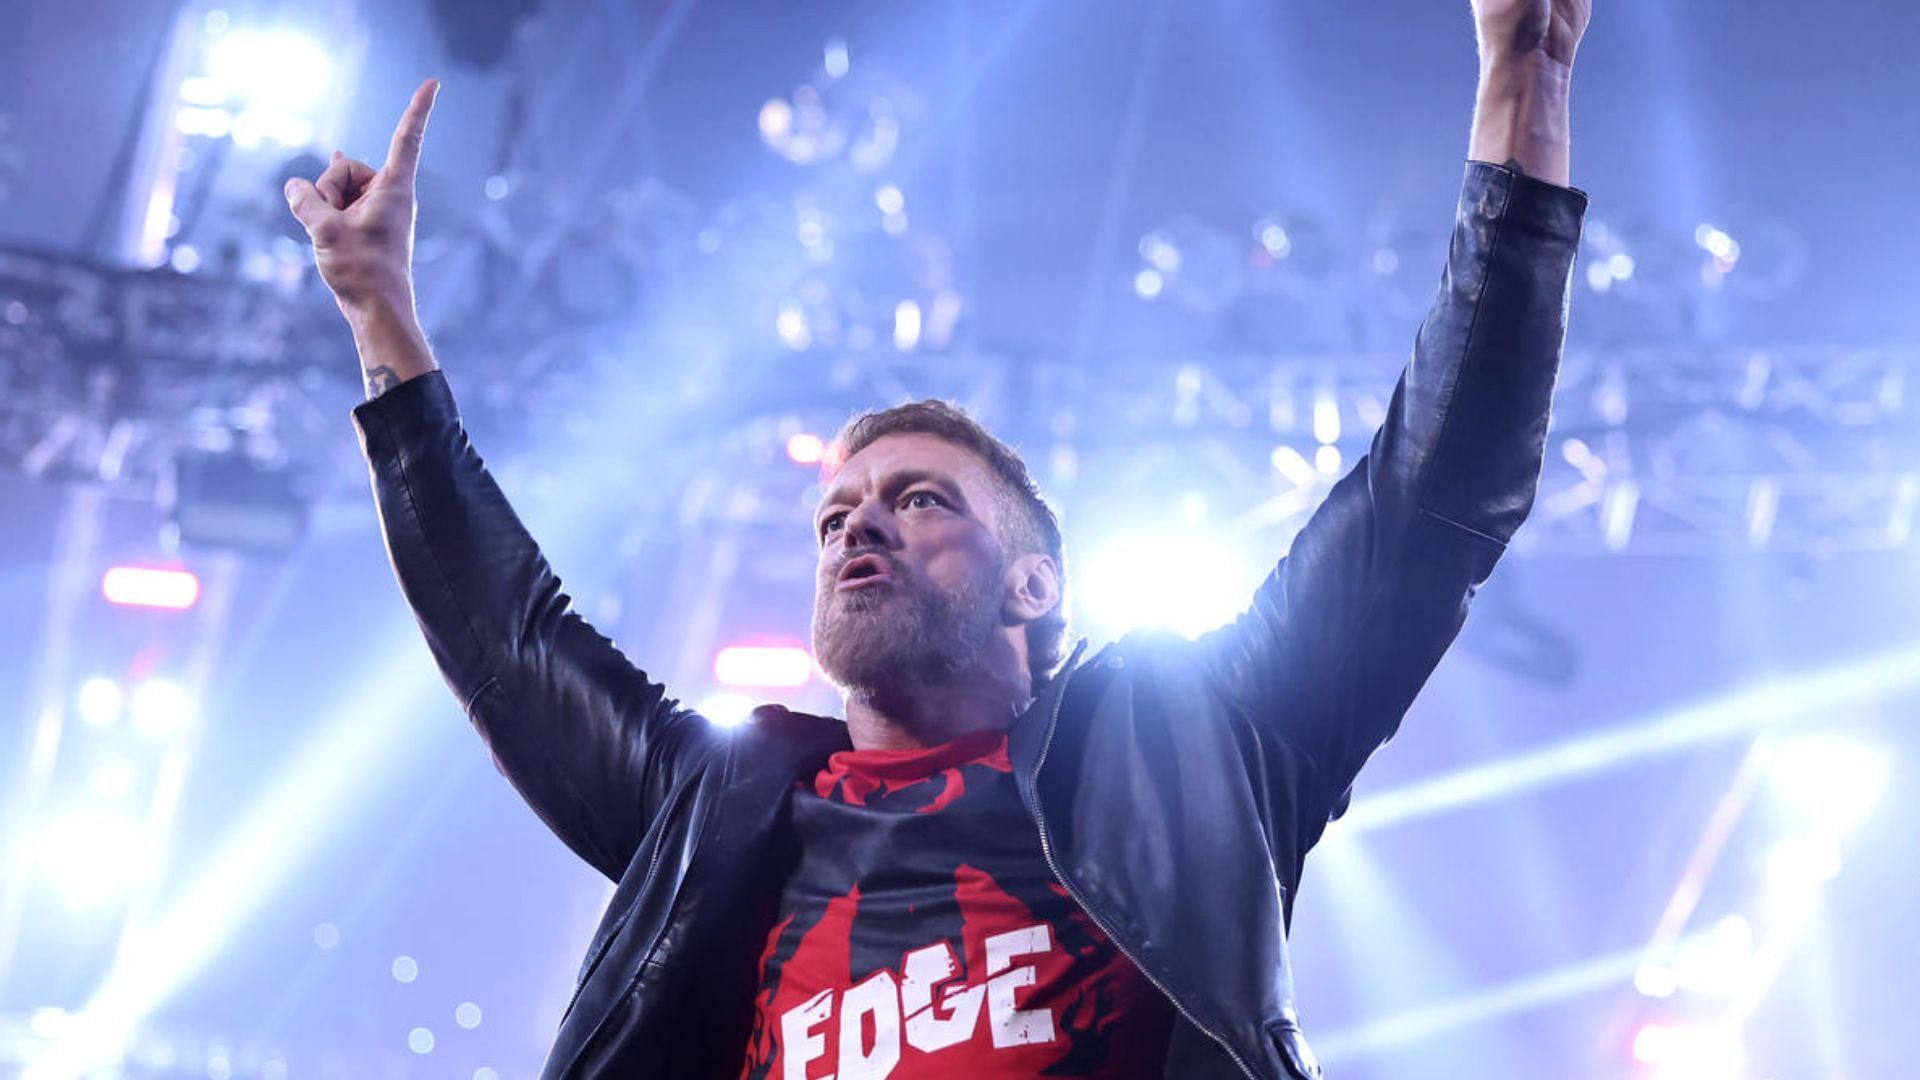 Edge is a 11-time World Champion!